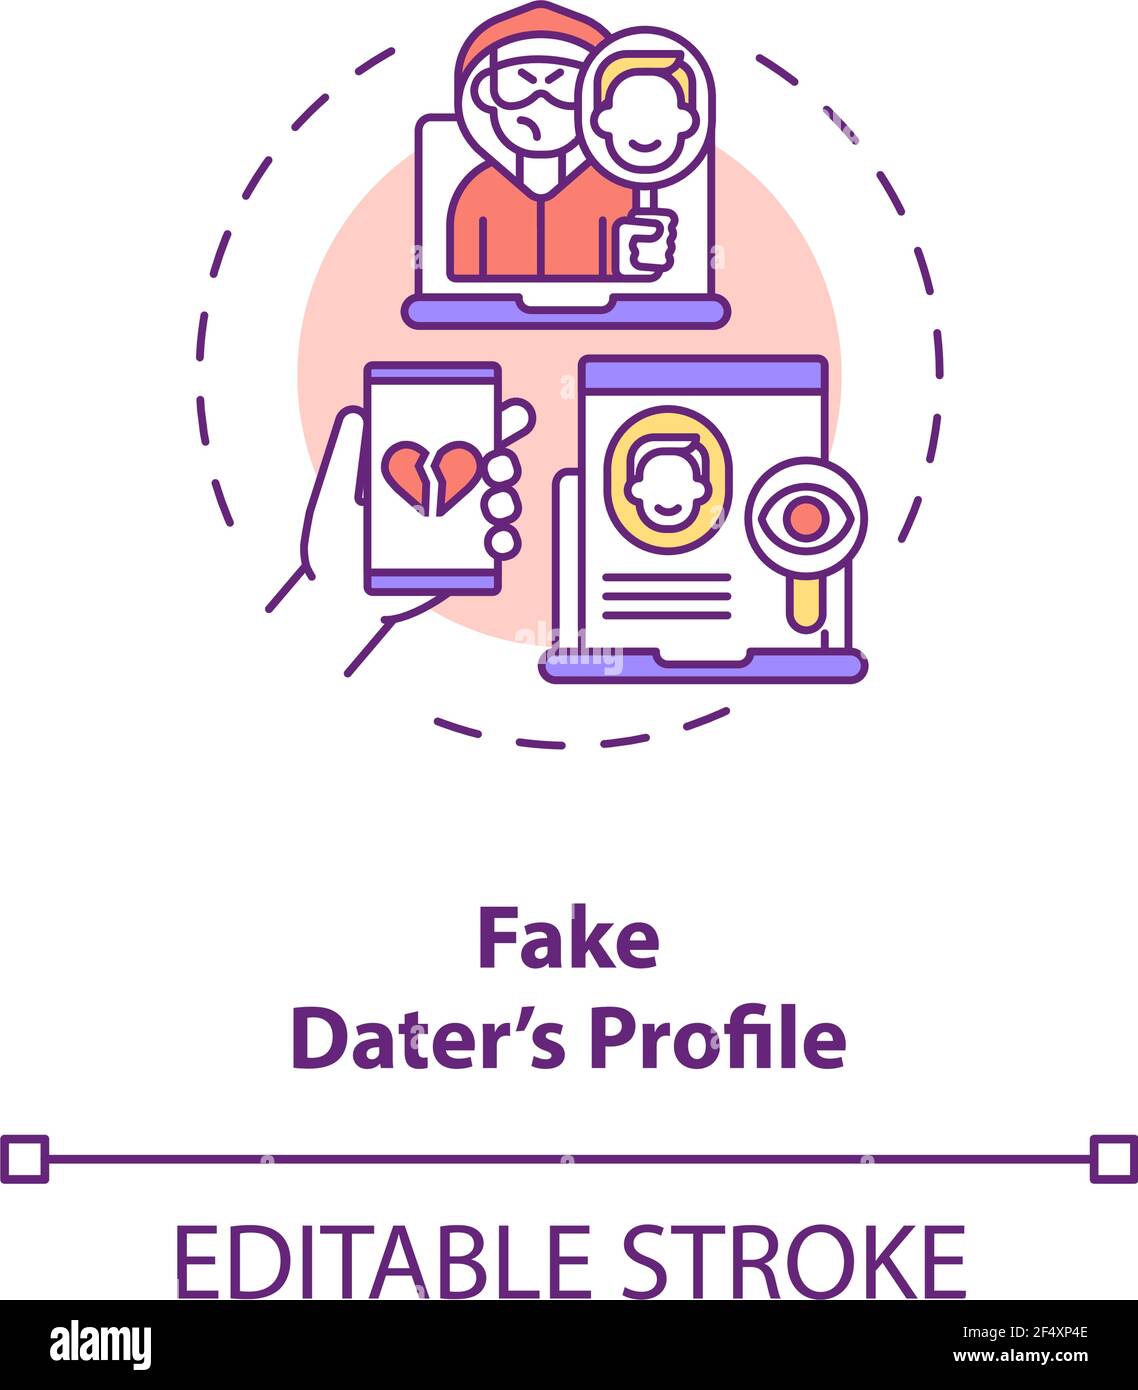 Fake dater profile on dating website concept icon. Stock Vector